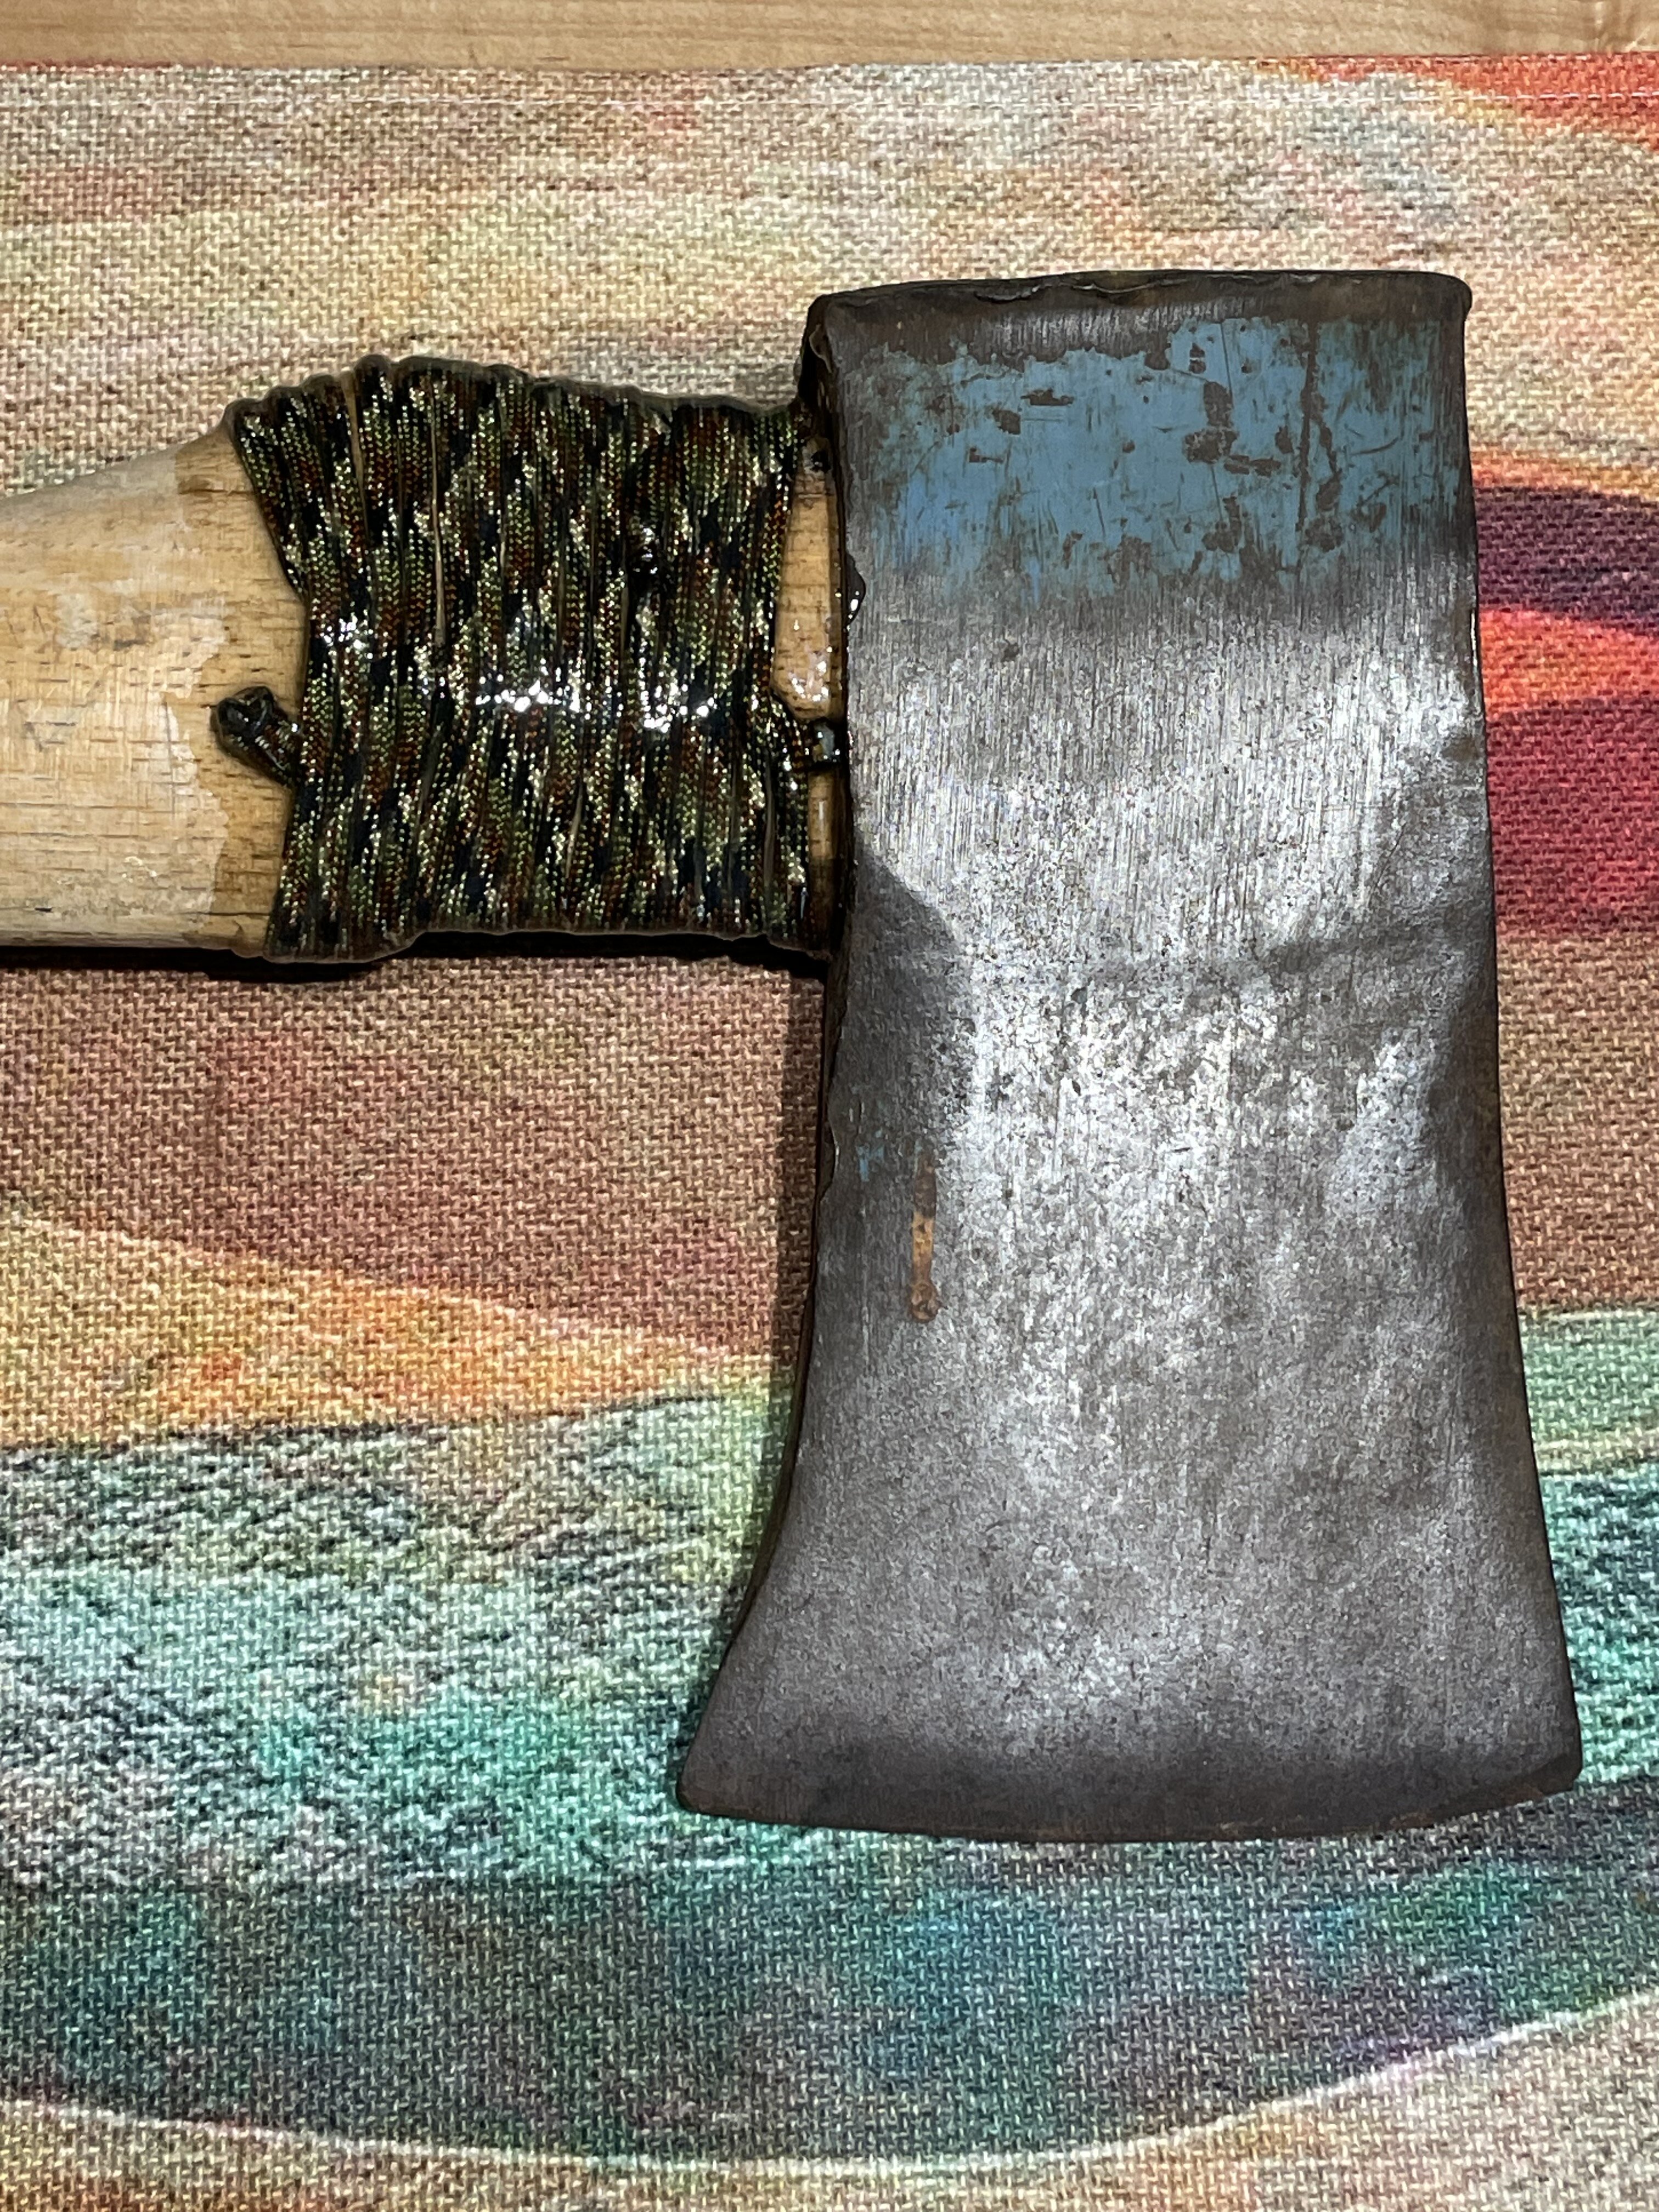 another thread entitled "Can anyone ID this old axe head?"